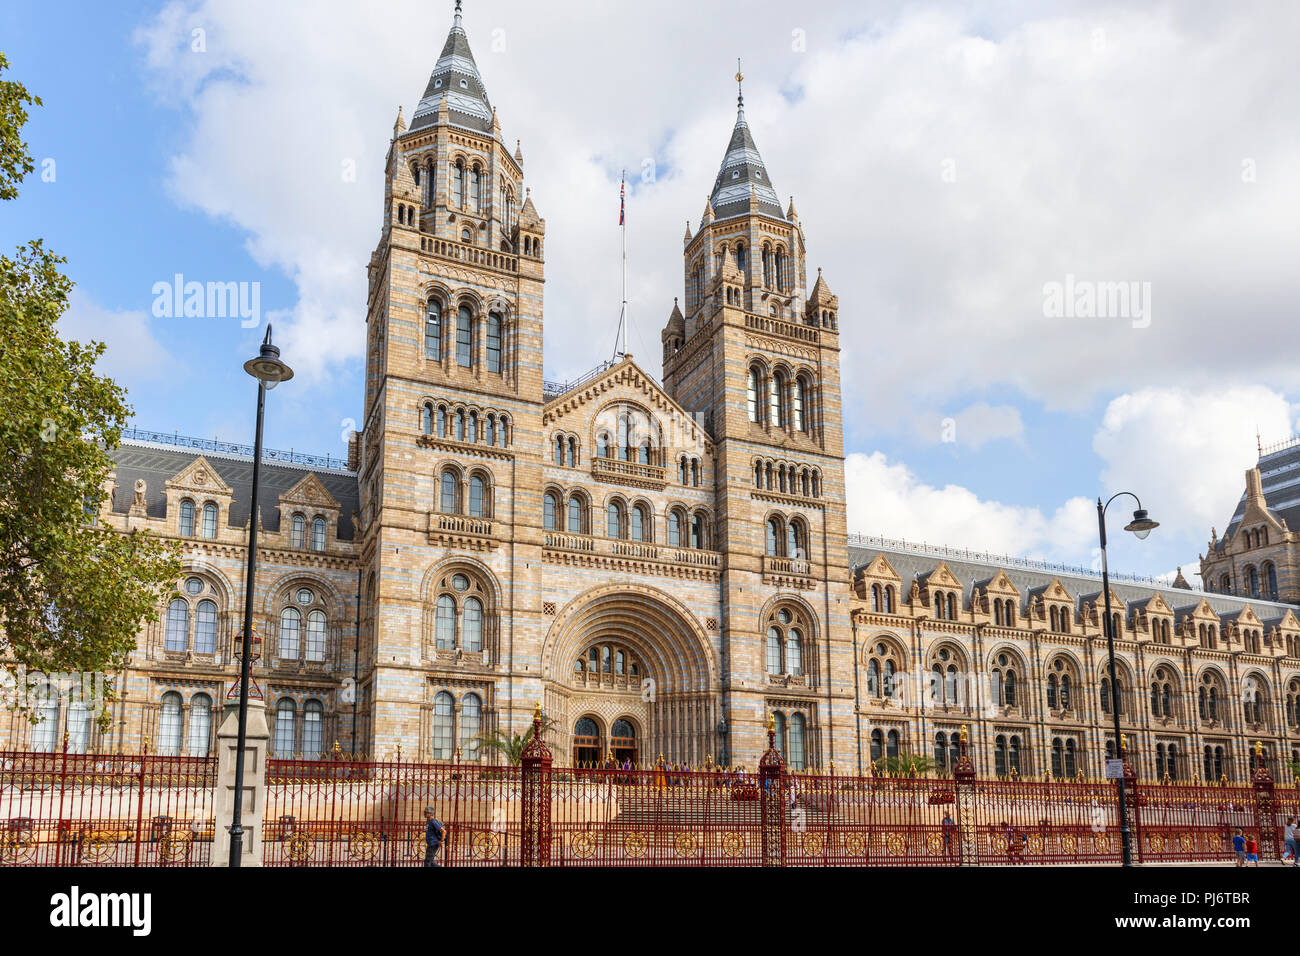 The iconic Natural History Museum Alfred Waterhouse Building frontage on Cromwell Road, South Kensington, London SW7, a leading UK tourist attraction Stock Photo